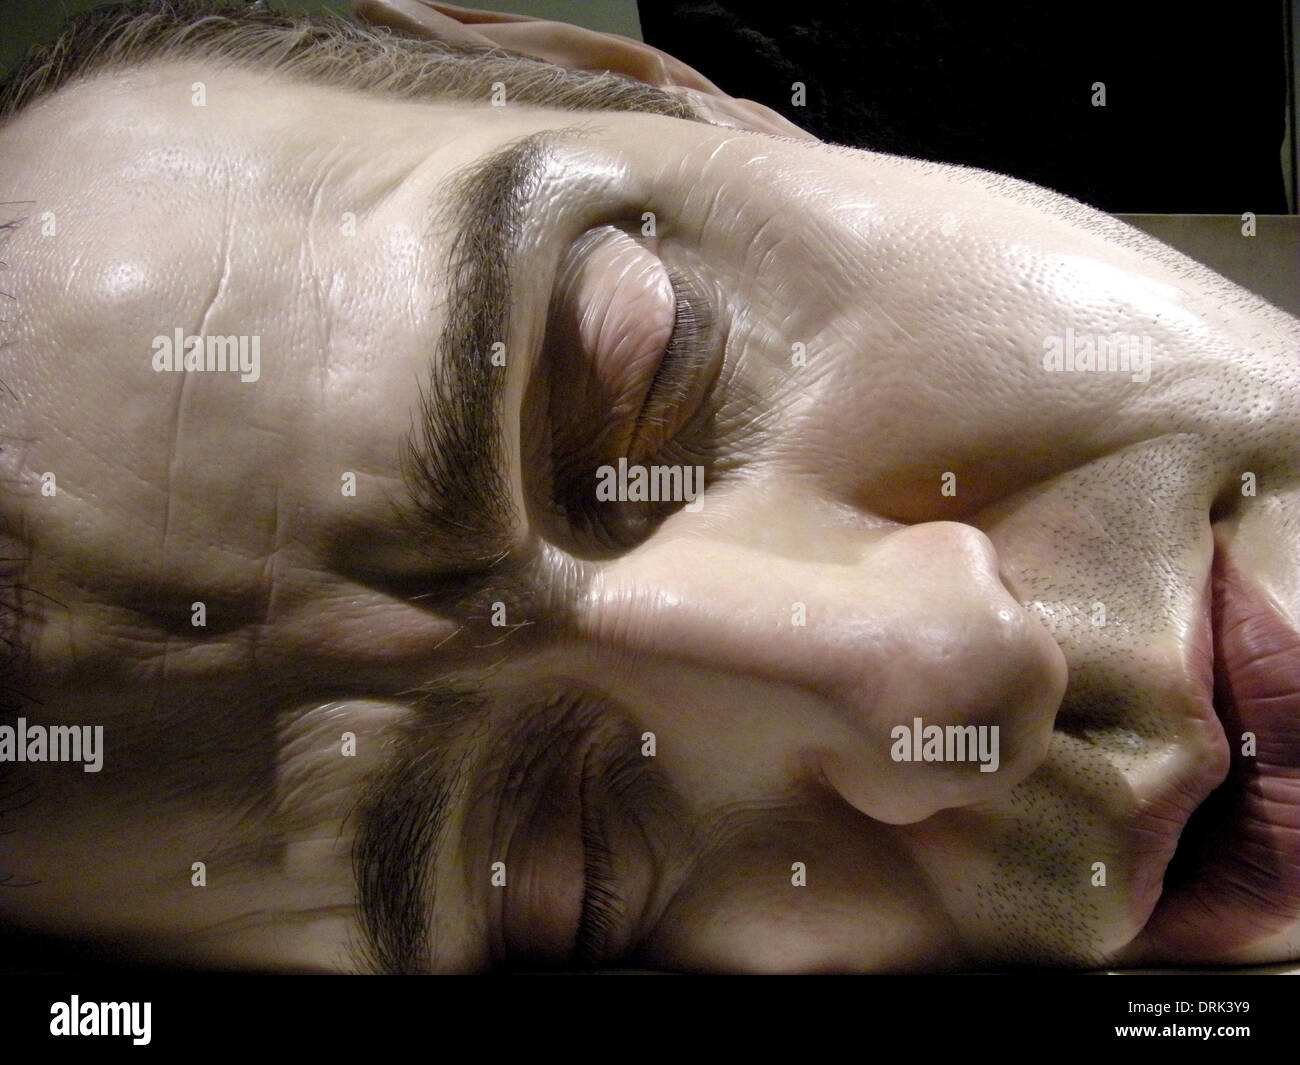 Artist's Ron Mueck Mask II hyperrealist self-portrait on exhibition at the British Museum, London, UK Stock Photo